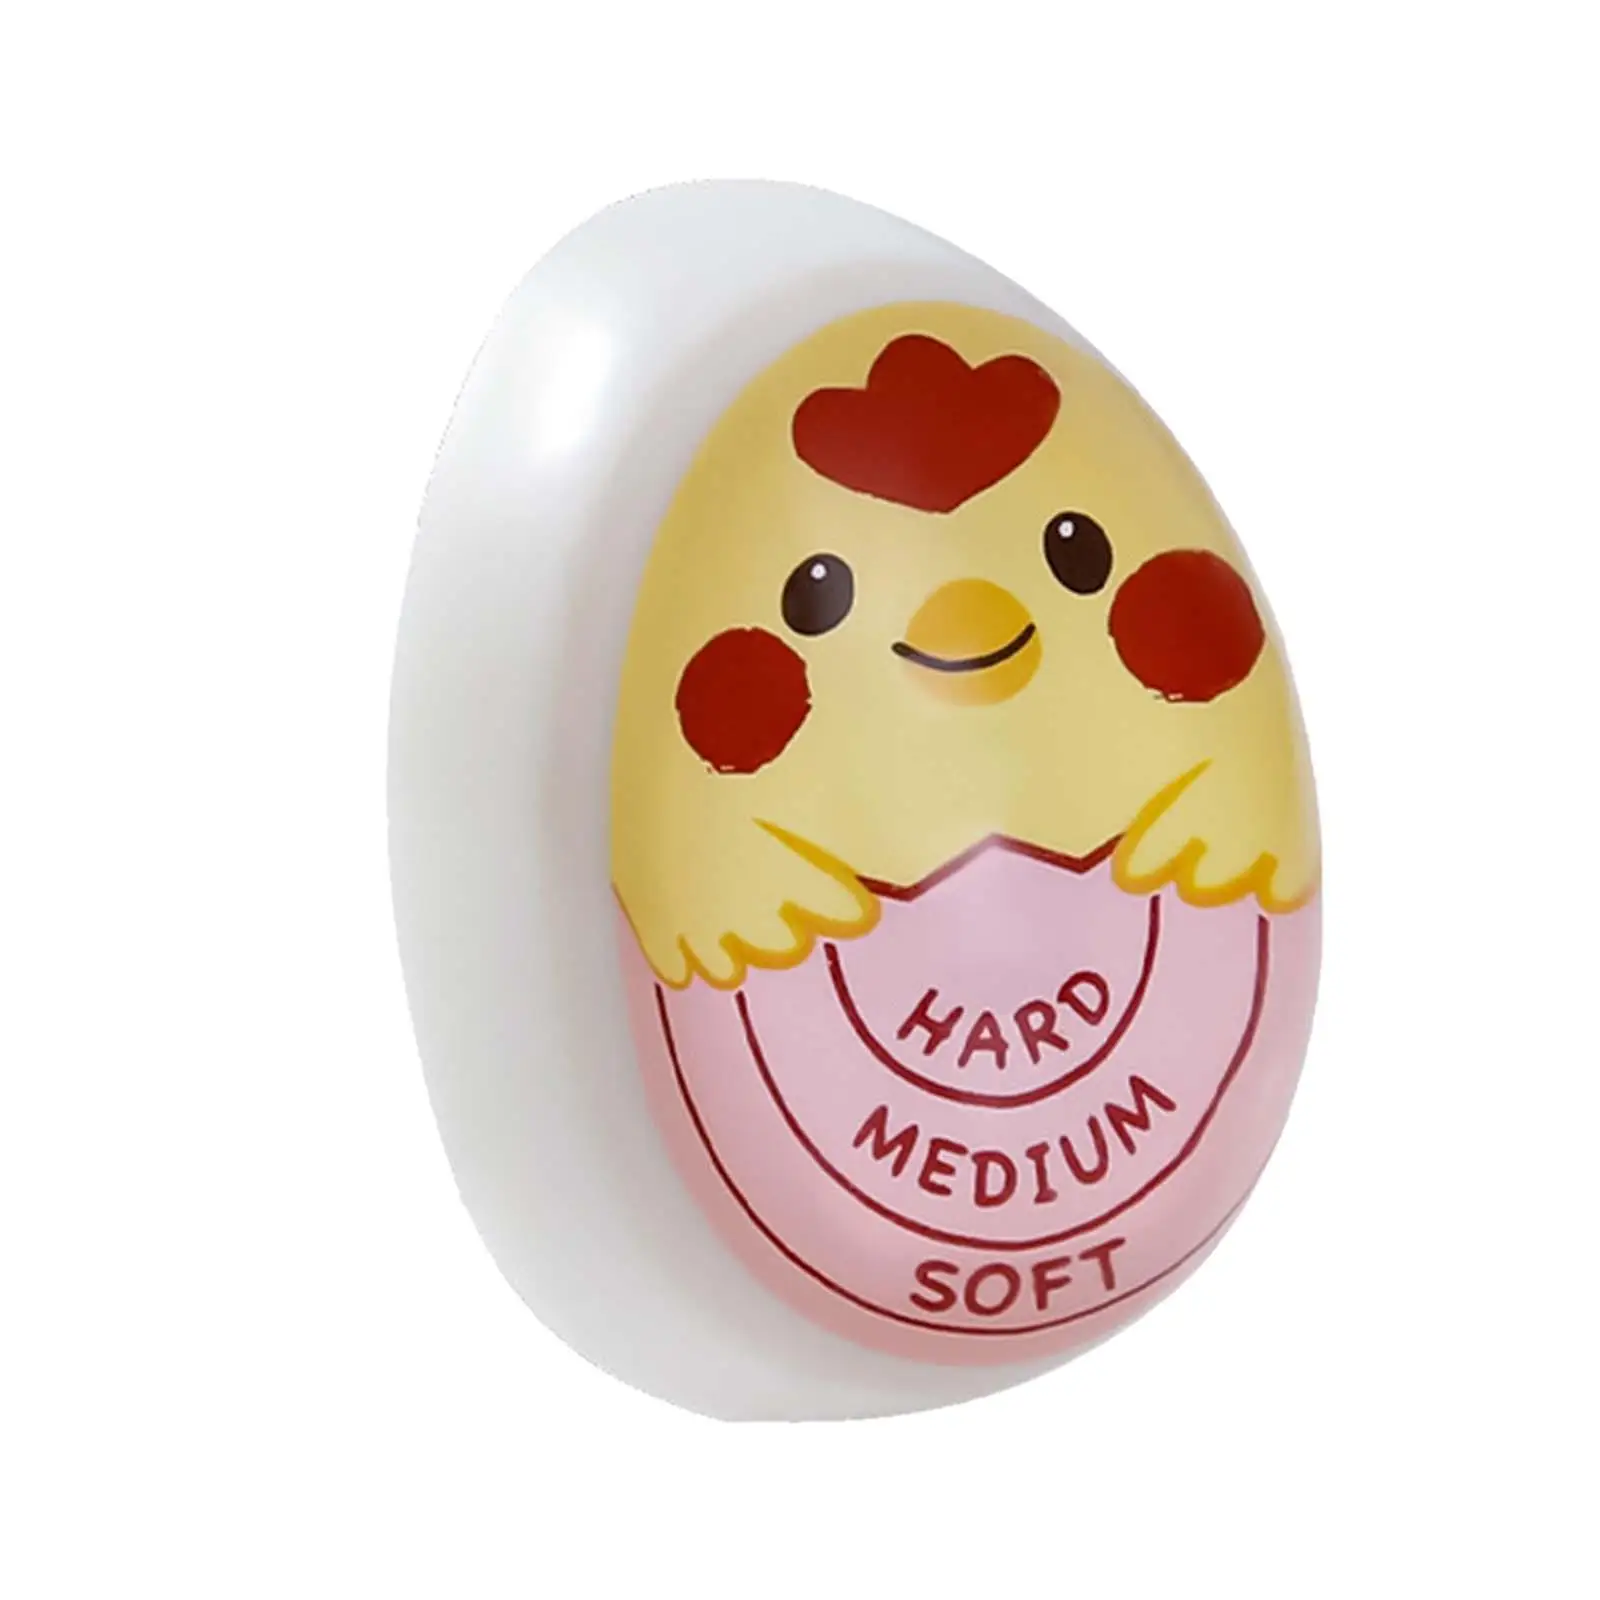 Egg Timer Colour Changing Easy to Read Display Egg Cooked Degree for Kitchen